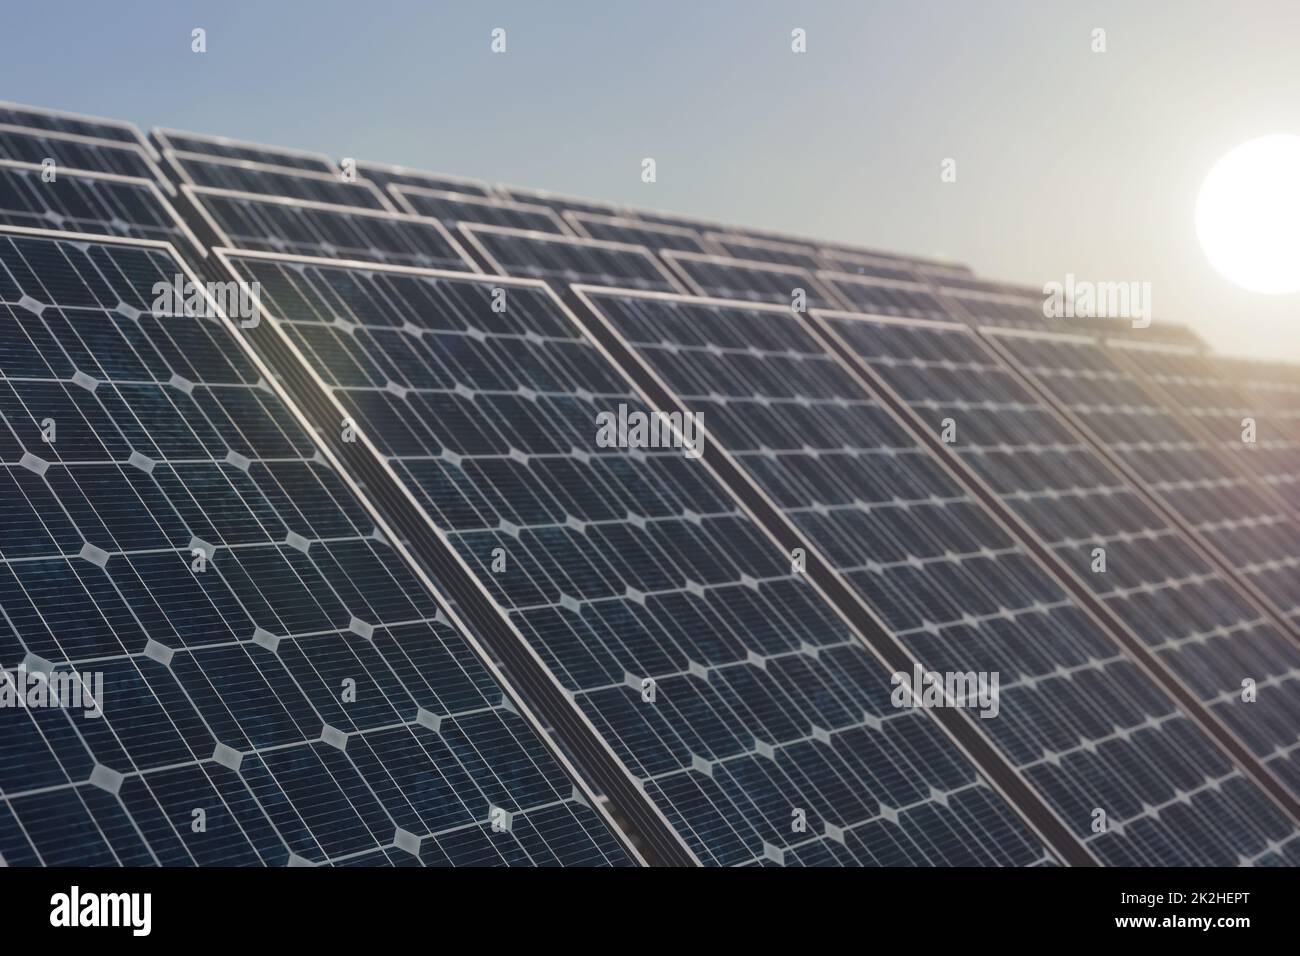 Solar power plant against the rising sun, selective focus on the first solar panel. Stock Photo